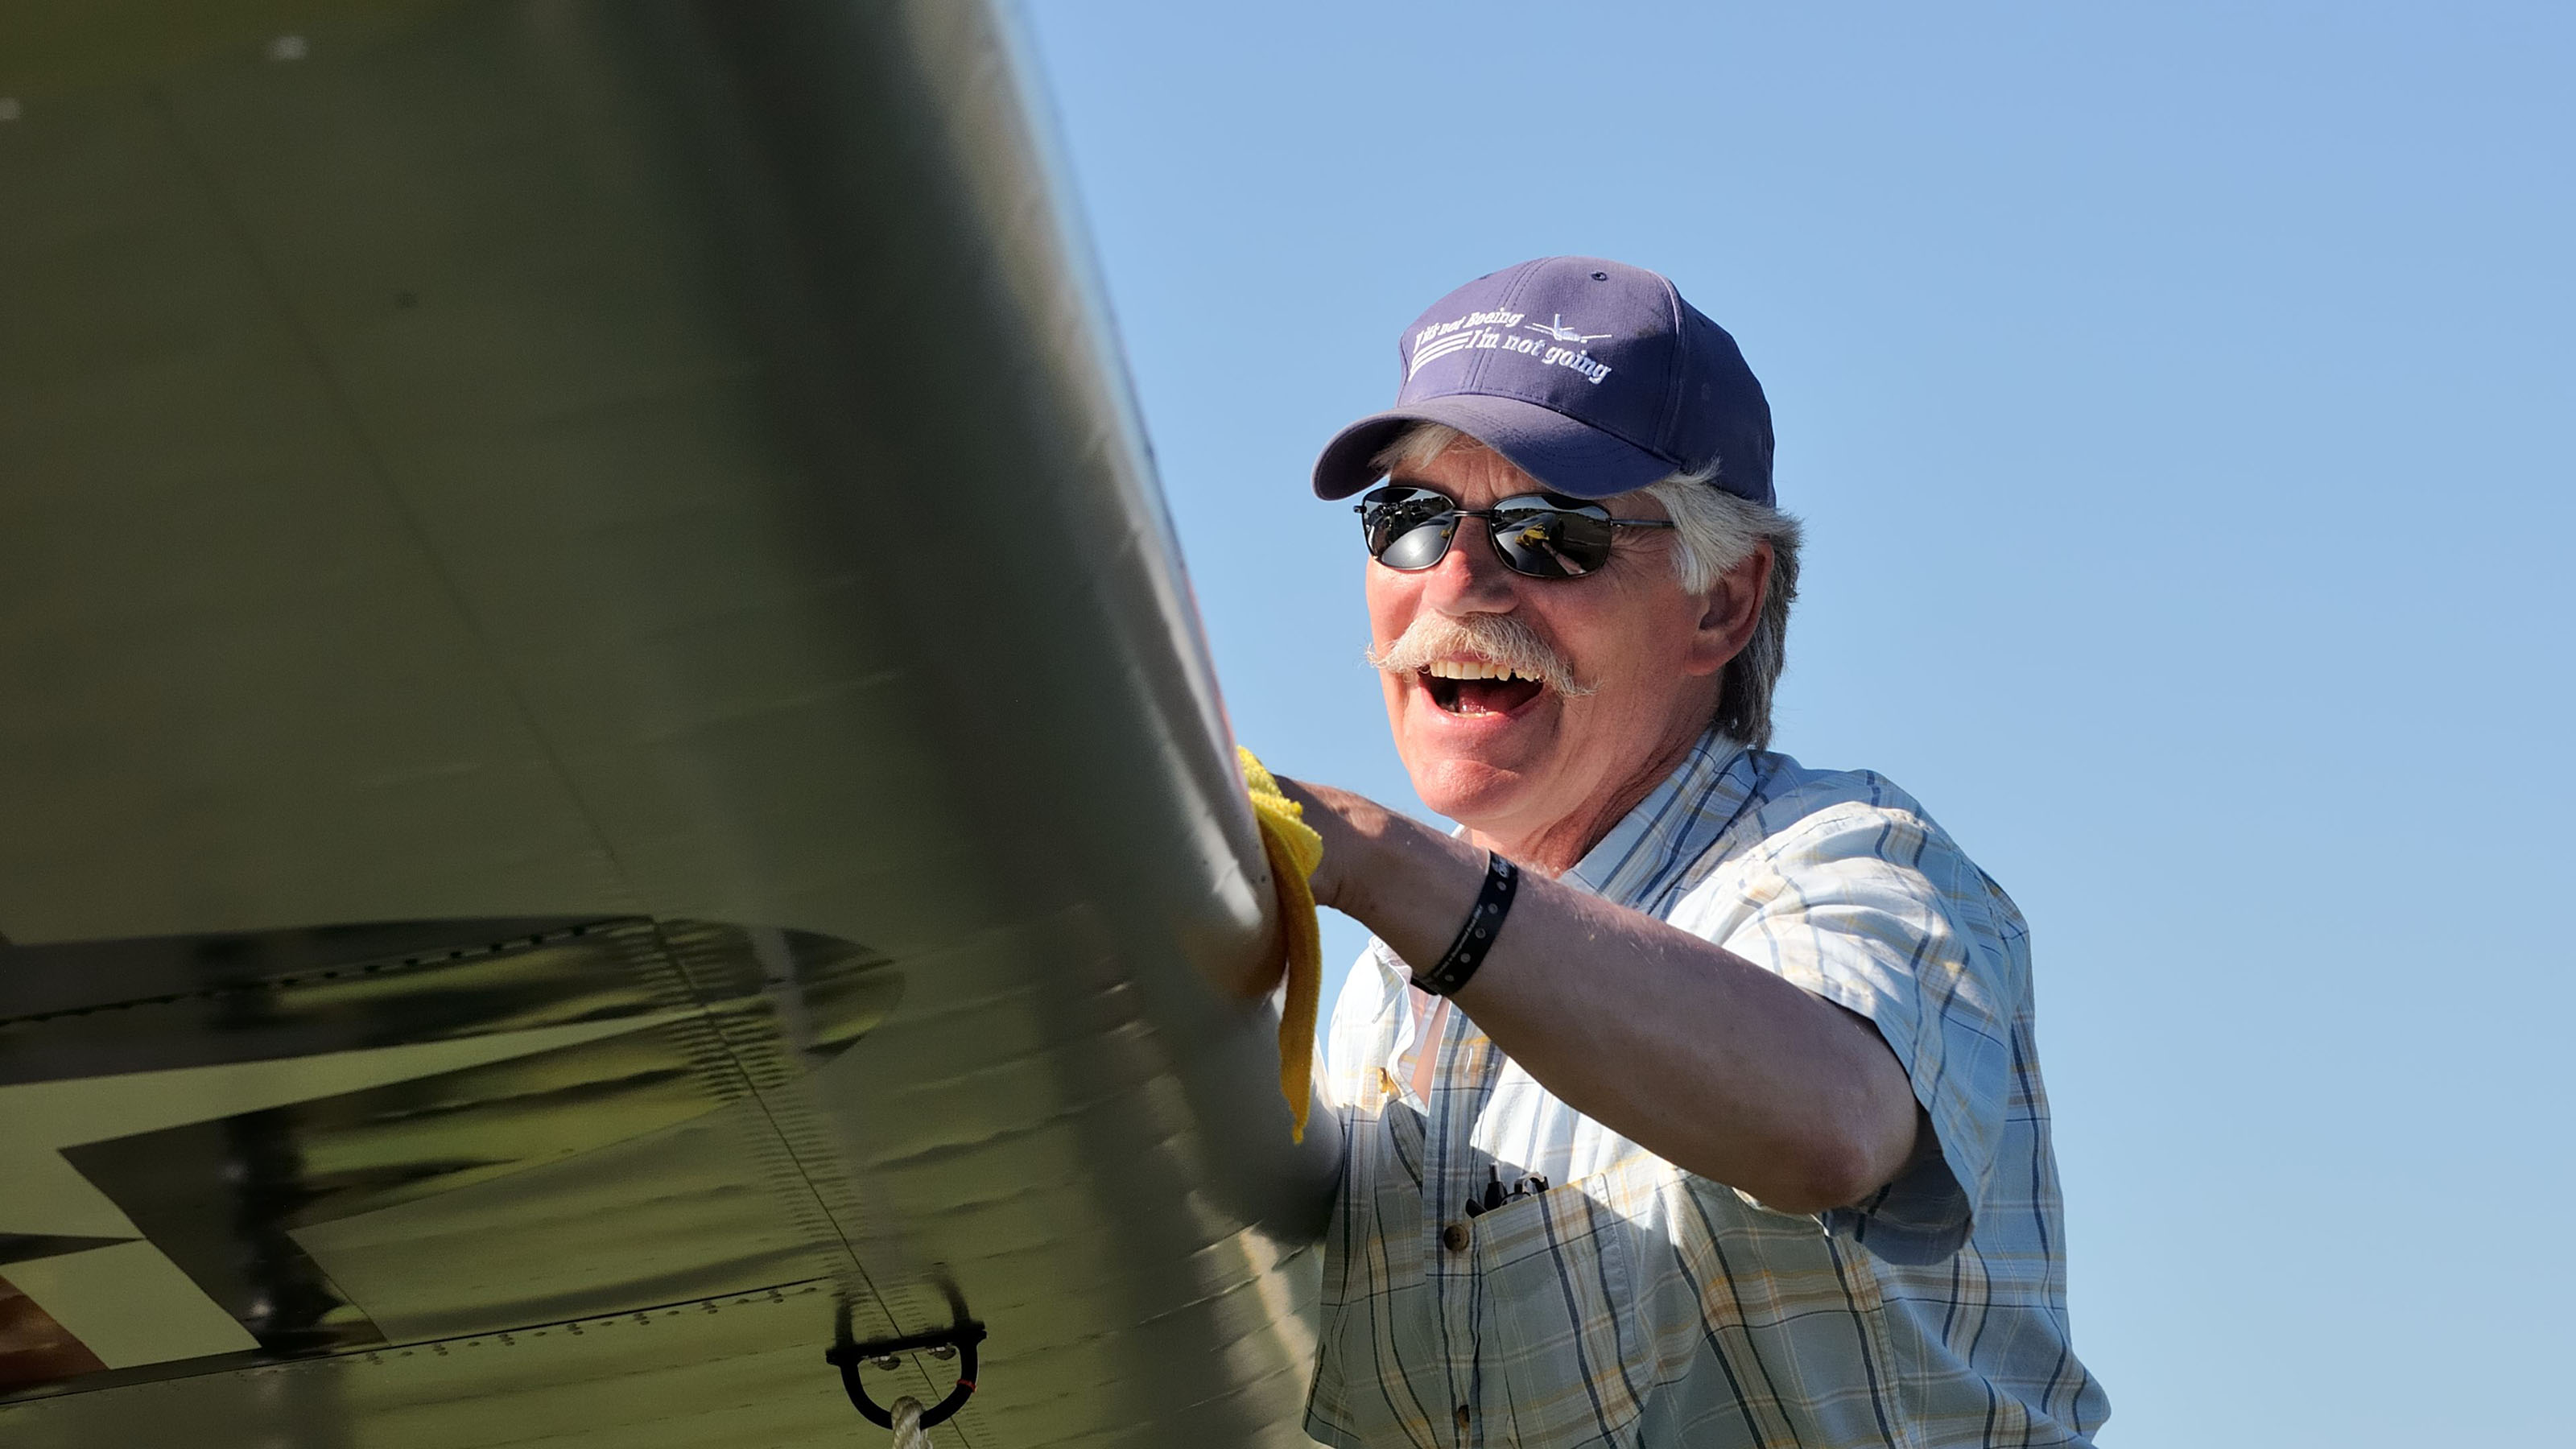 Keith Brunquist of Wasilla, Alaska, polishes the wing of his Boeing YL-15 Scout shortly before it is judged at EAA AirVenture 2017. The unique prototype won Grand Champion: Post World War II.